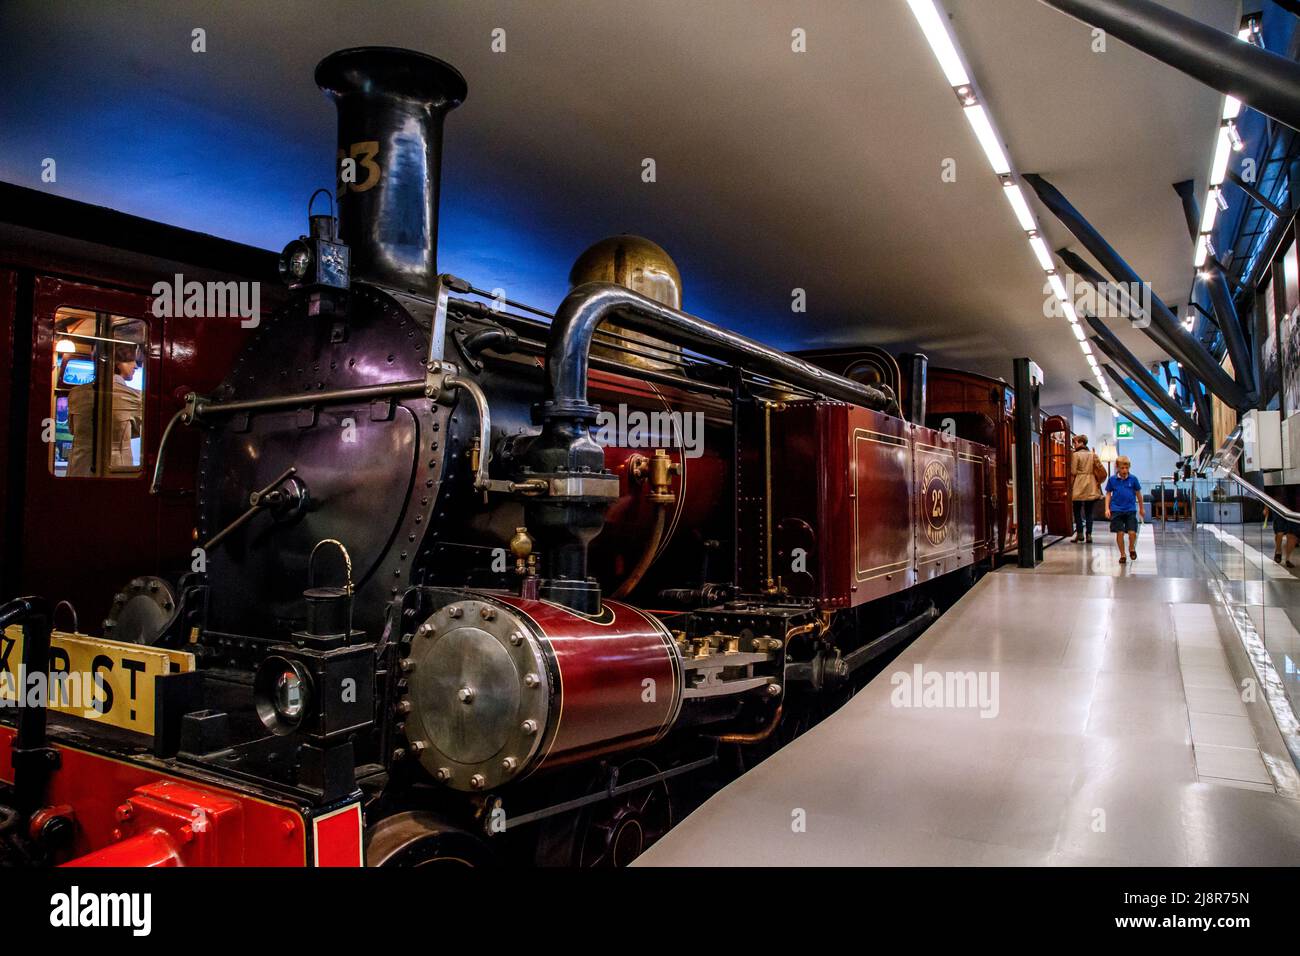 LONDON, GREAT BRITAIN - MAY 23, 2014: This is an exhibition of the London Transport Museum - first underground train. Stock Photo